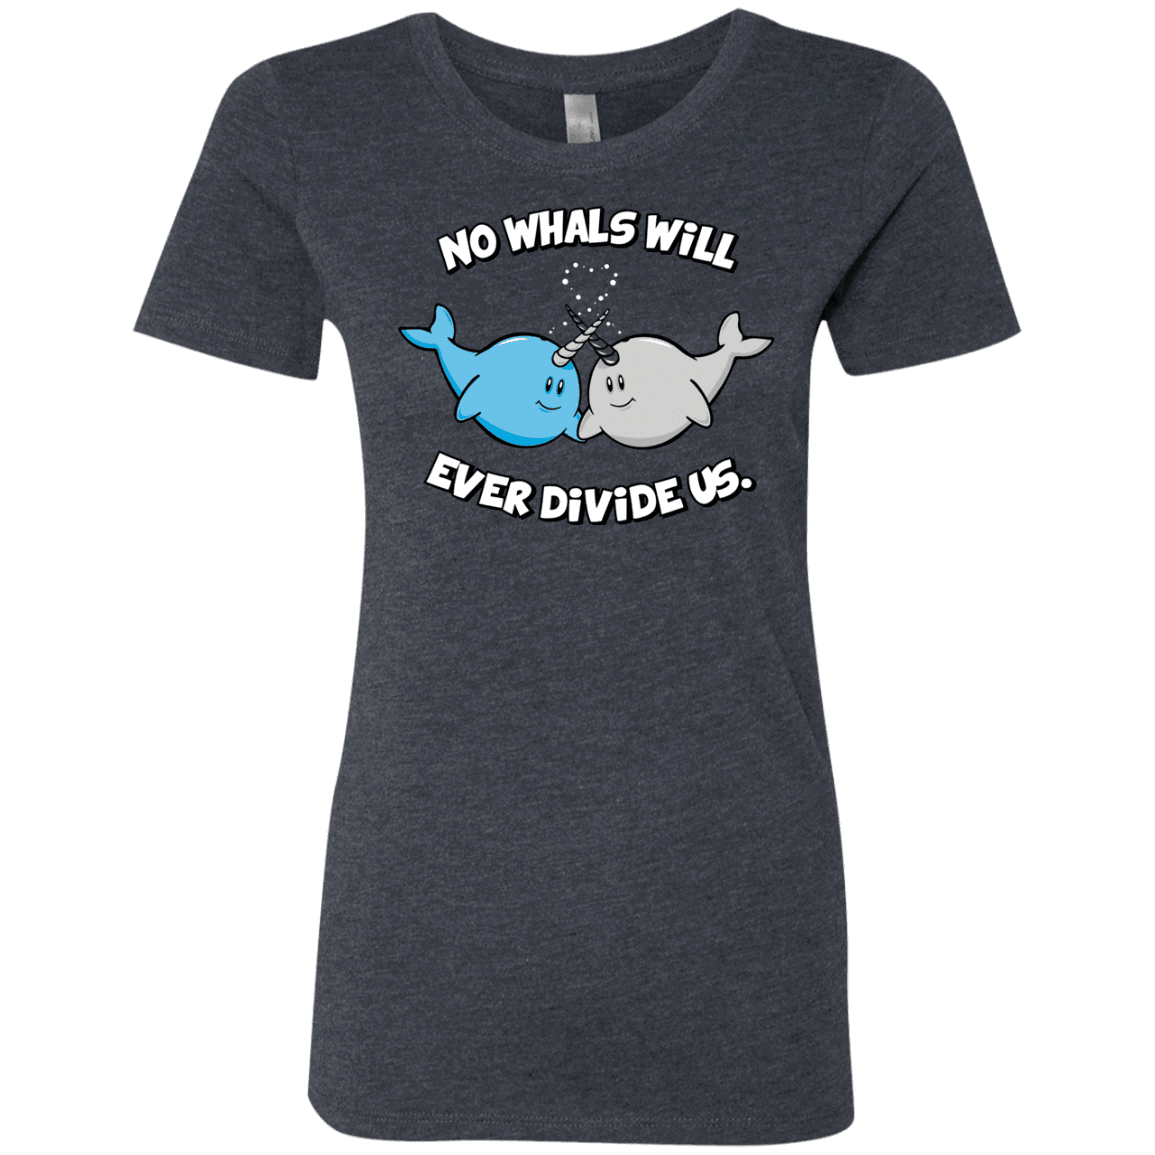 T-Shirts Vintage Navy / Small Whals Women's Triblend T-Shirt